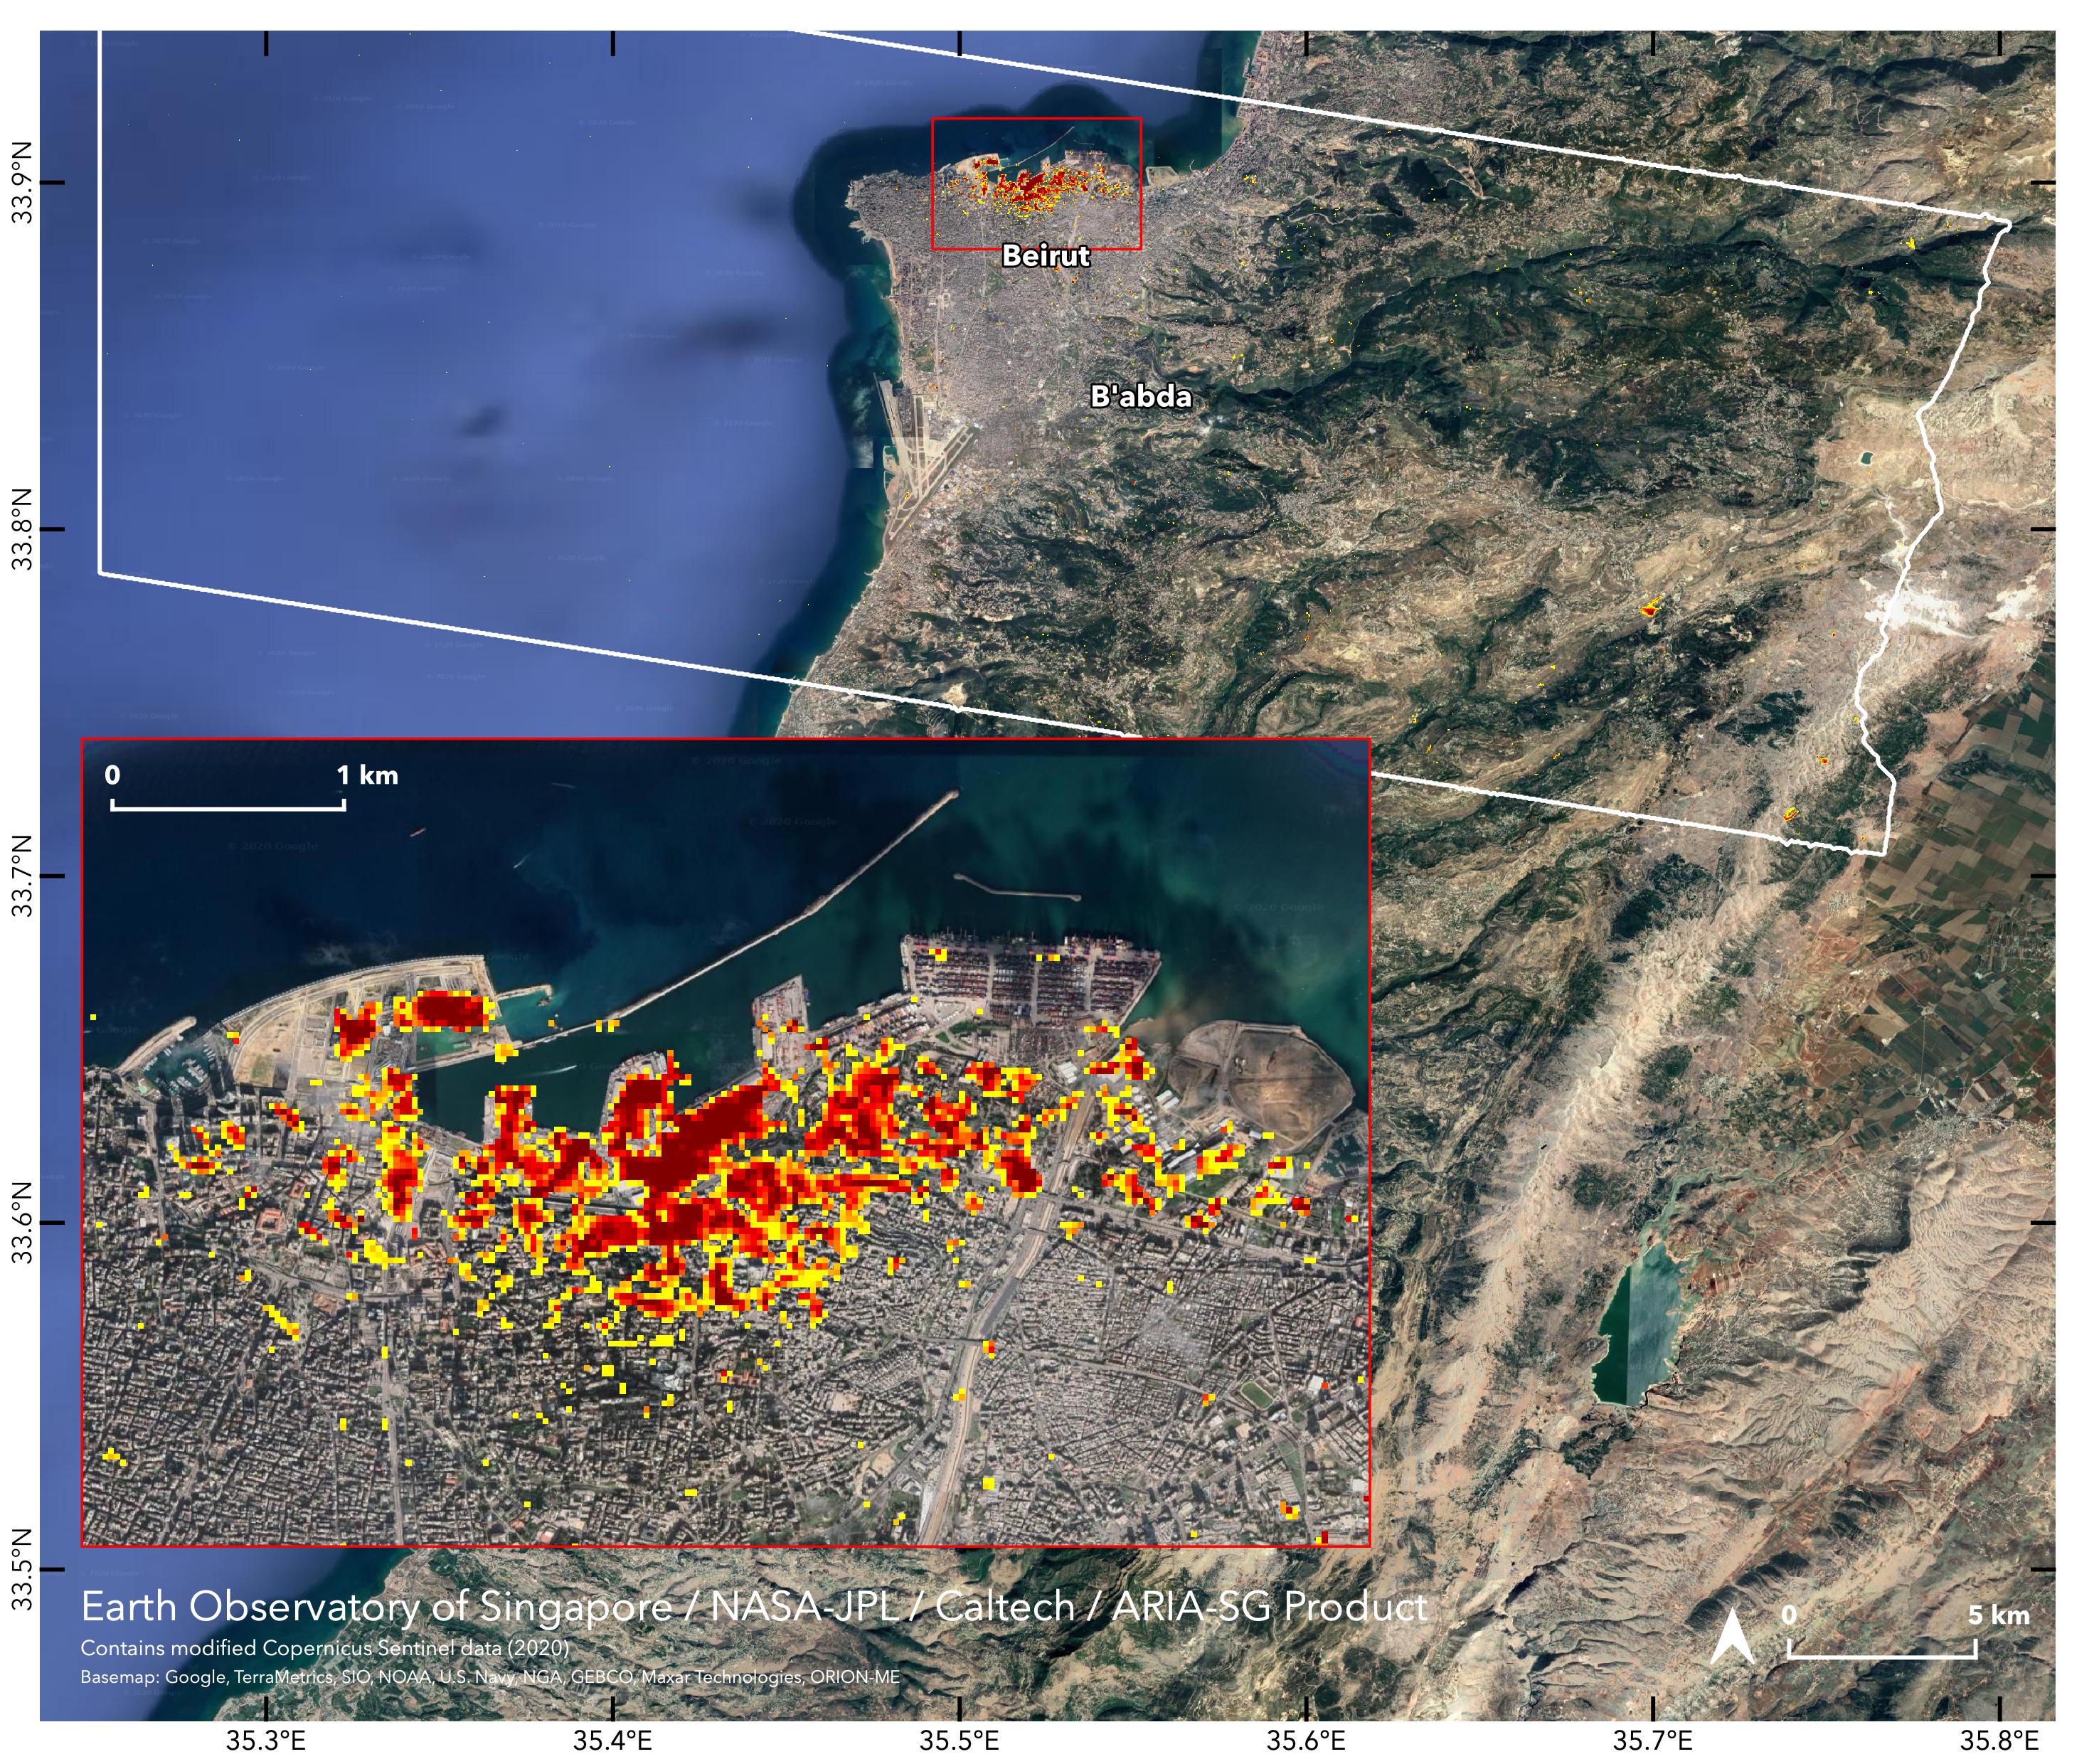 NASAs ARIA team, in collaboration with the Earth Observatory of Singapore, used satellite data to map the extent of likely damage following a massive explosion in Beirut.